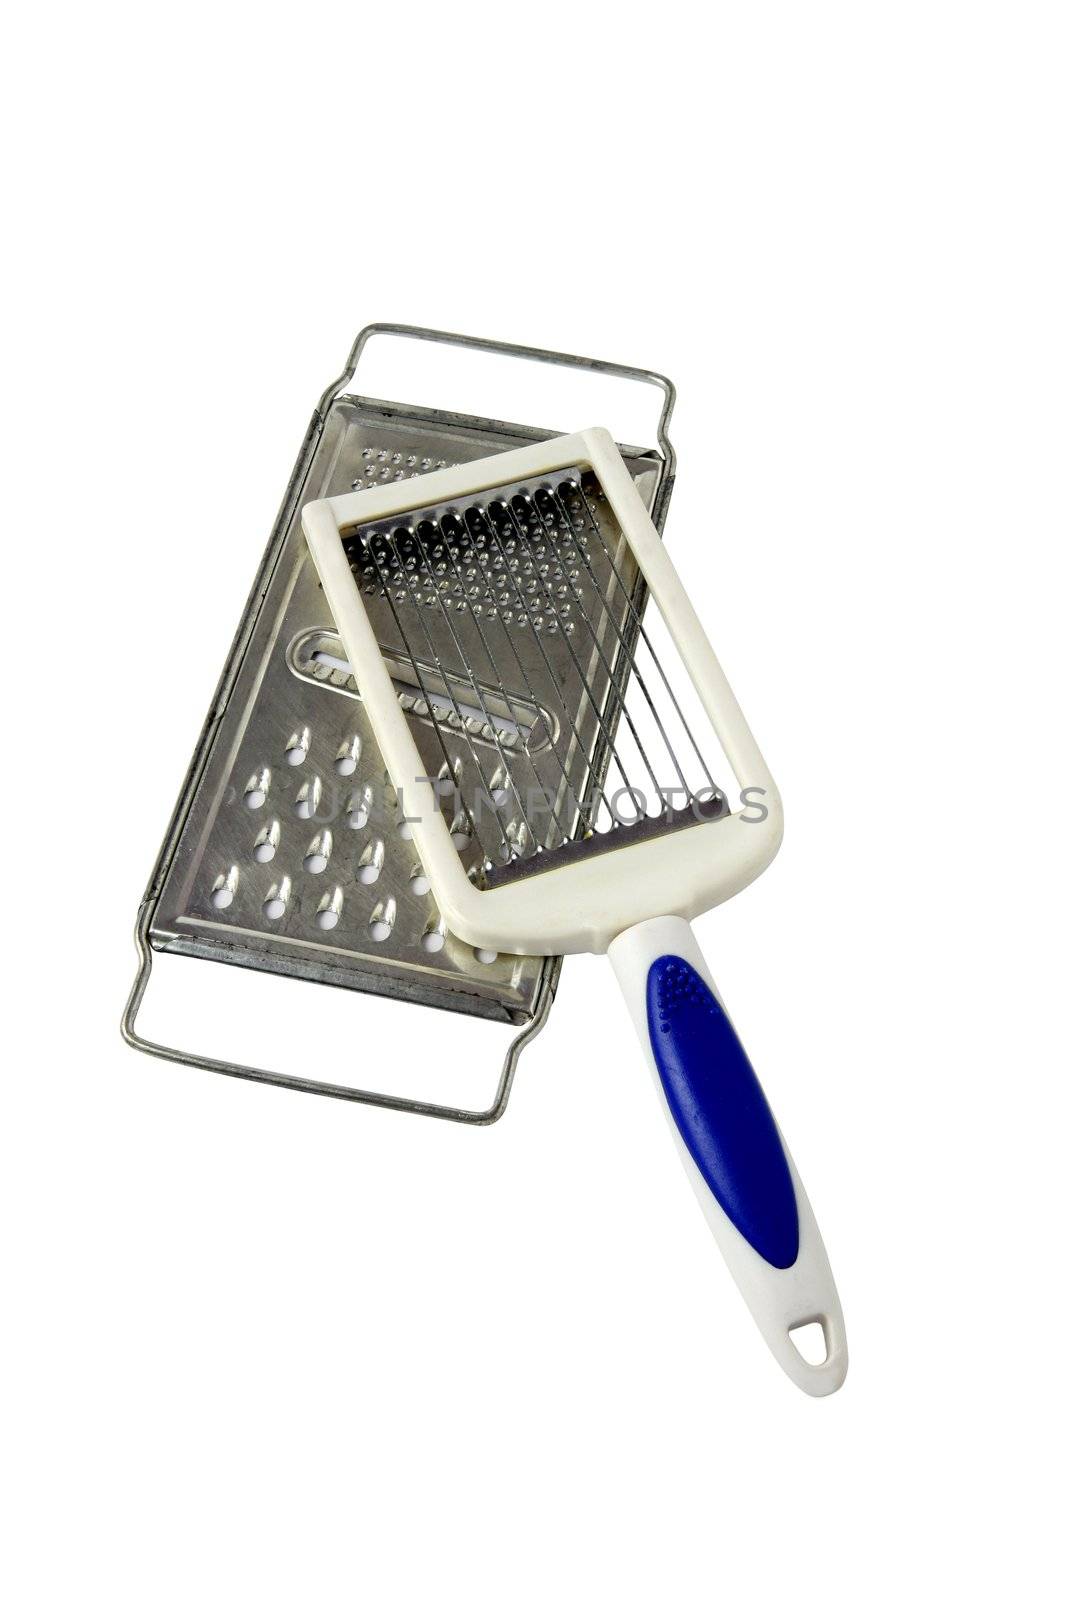 Cheese grater and slicer by phovoir